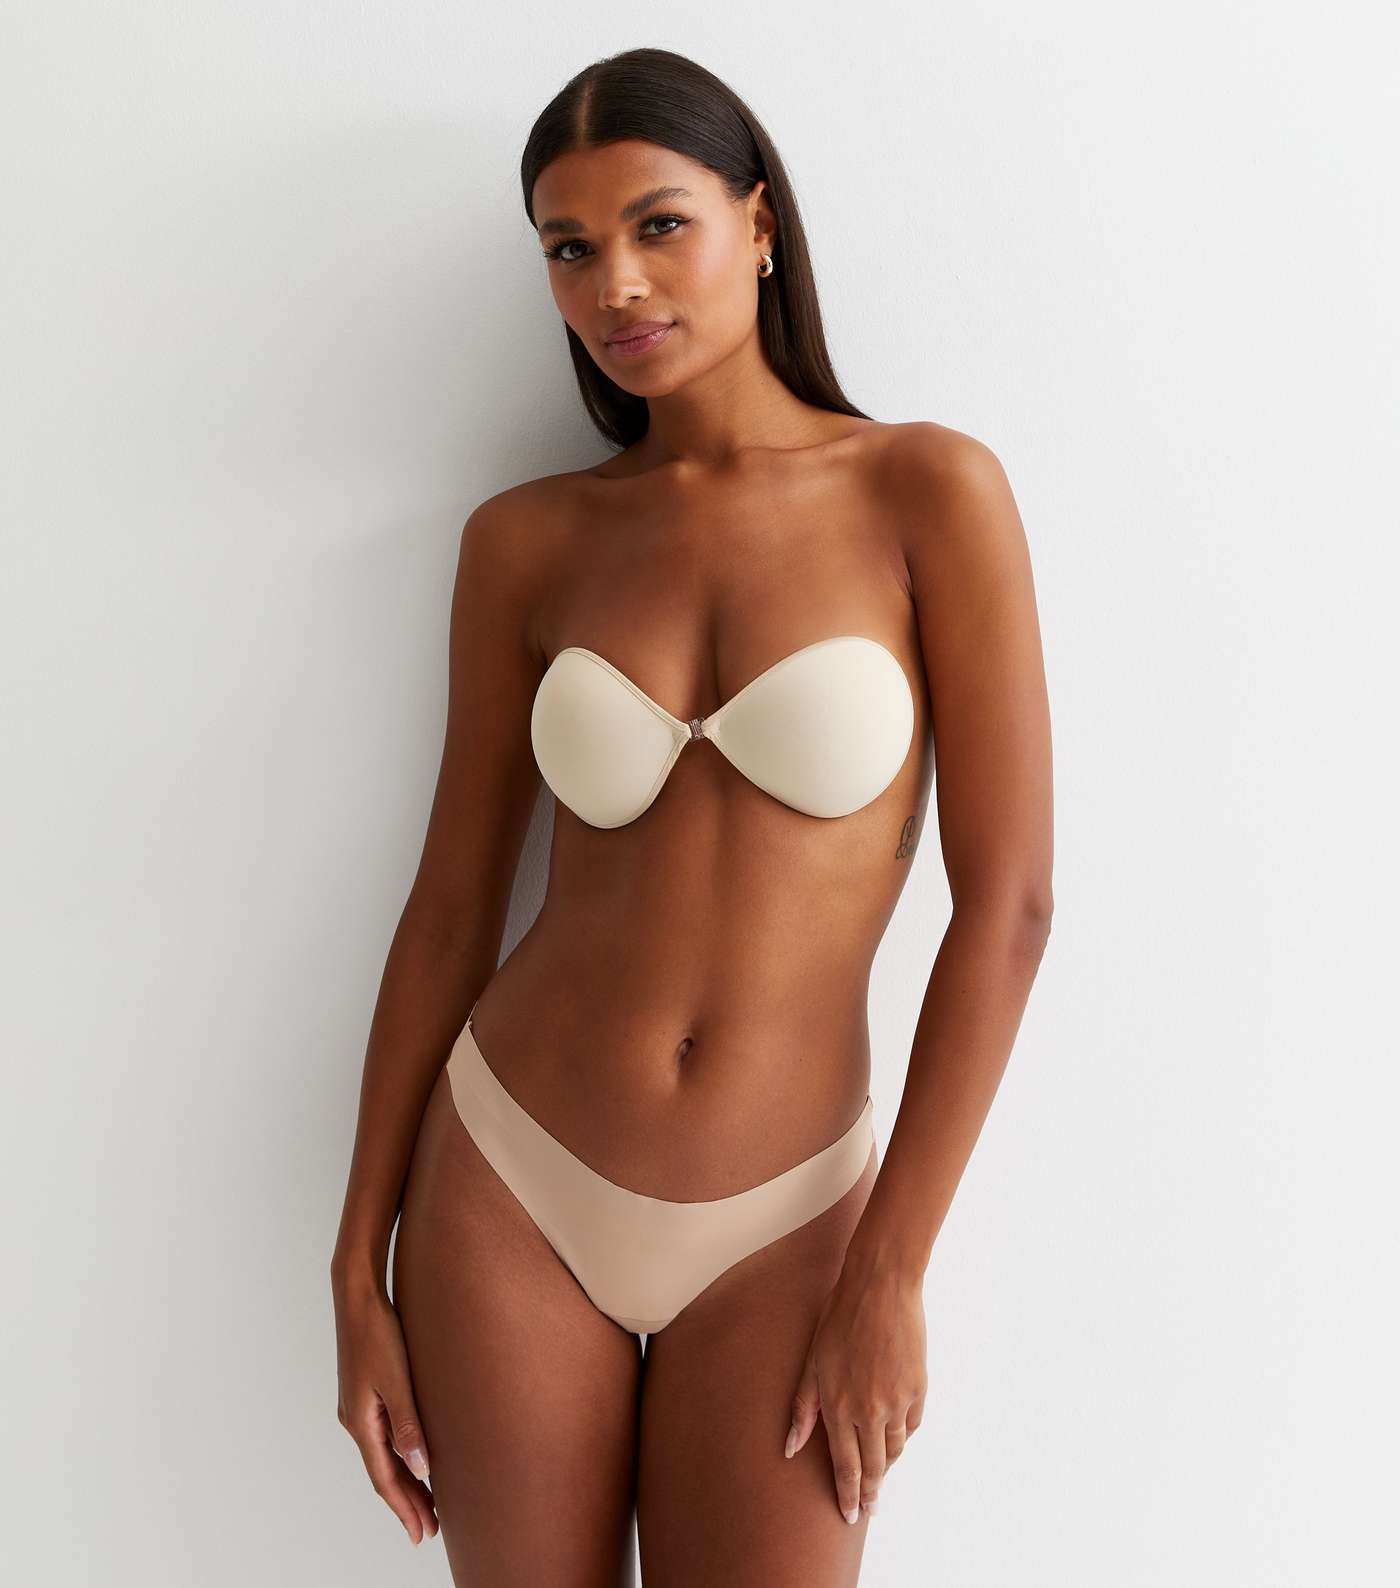 Perfection Beauty Tan C Cup Stick On Bra Image 3